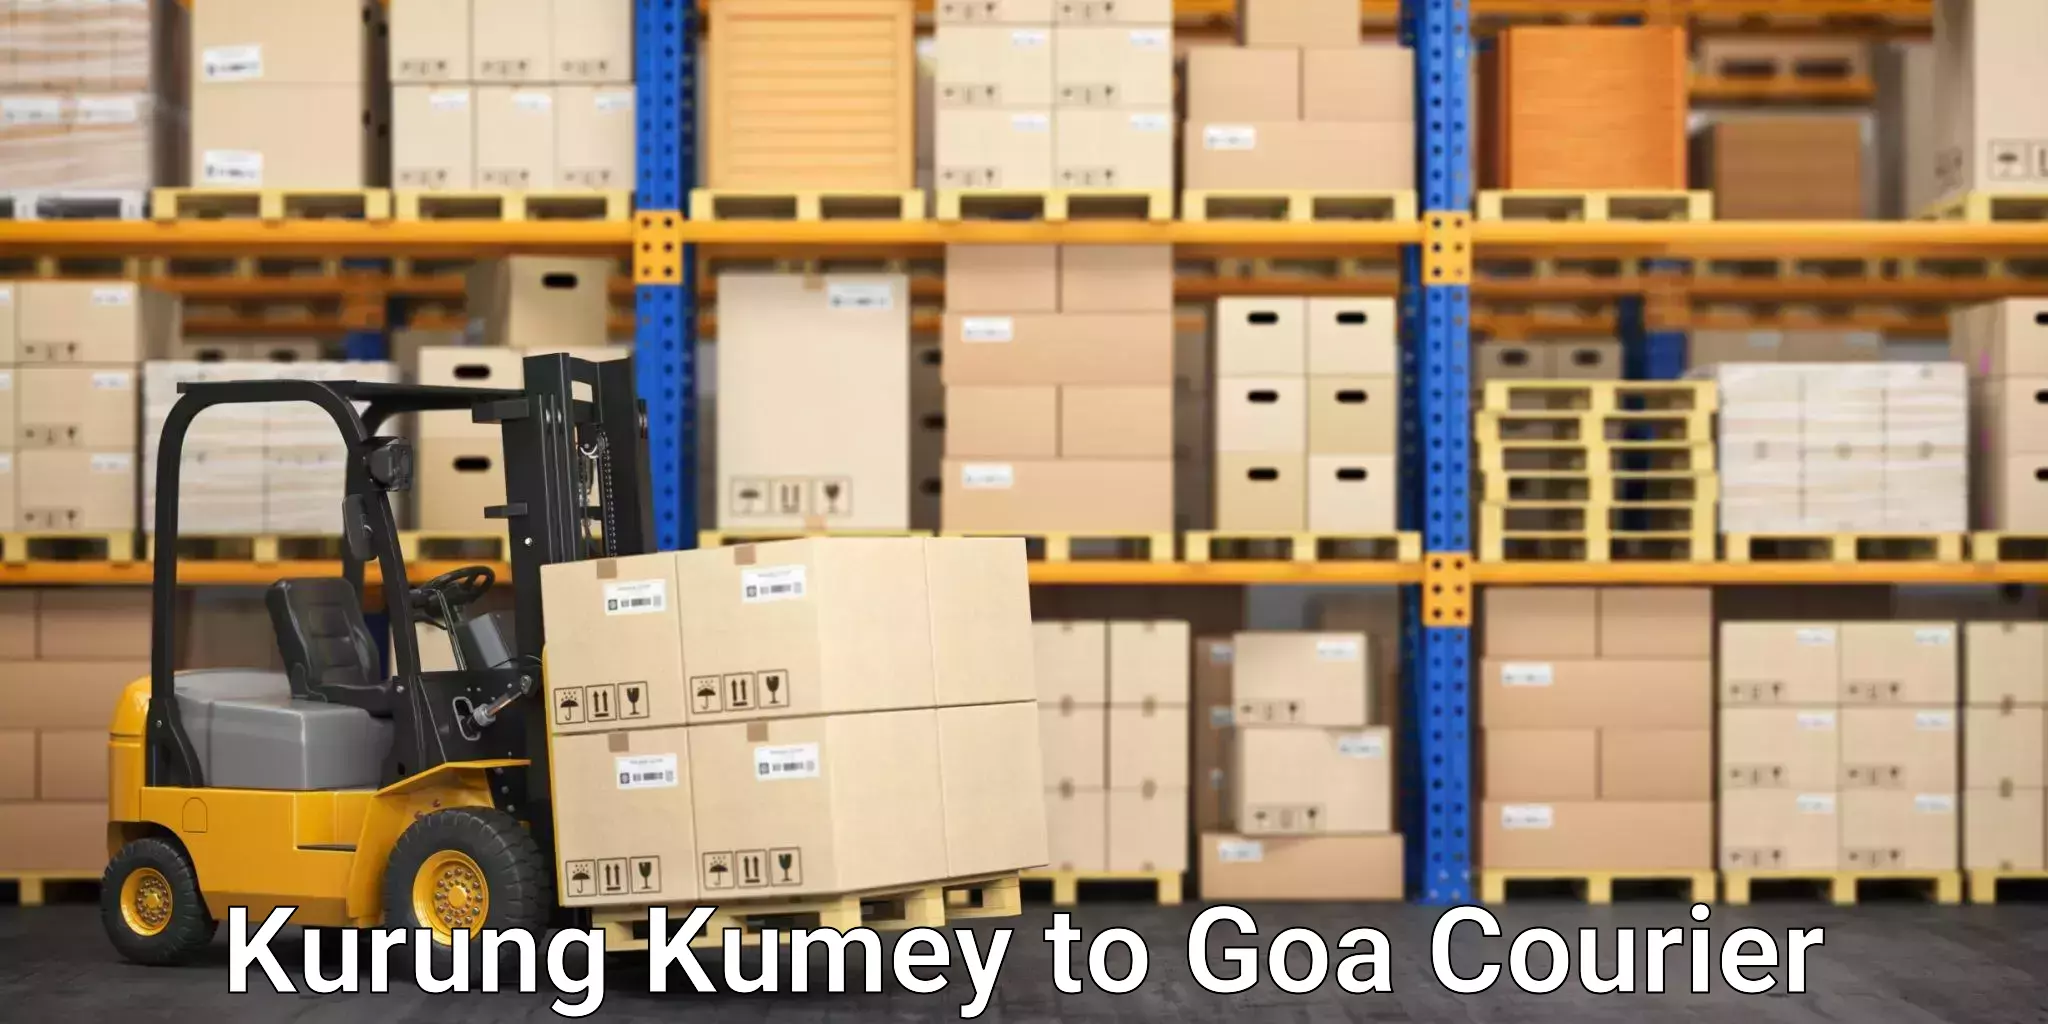 Round-the-clock parcel delivery Kurung Kumey to Goa